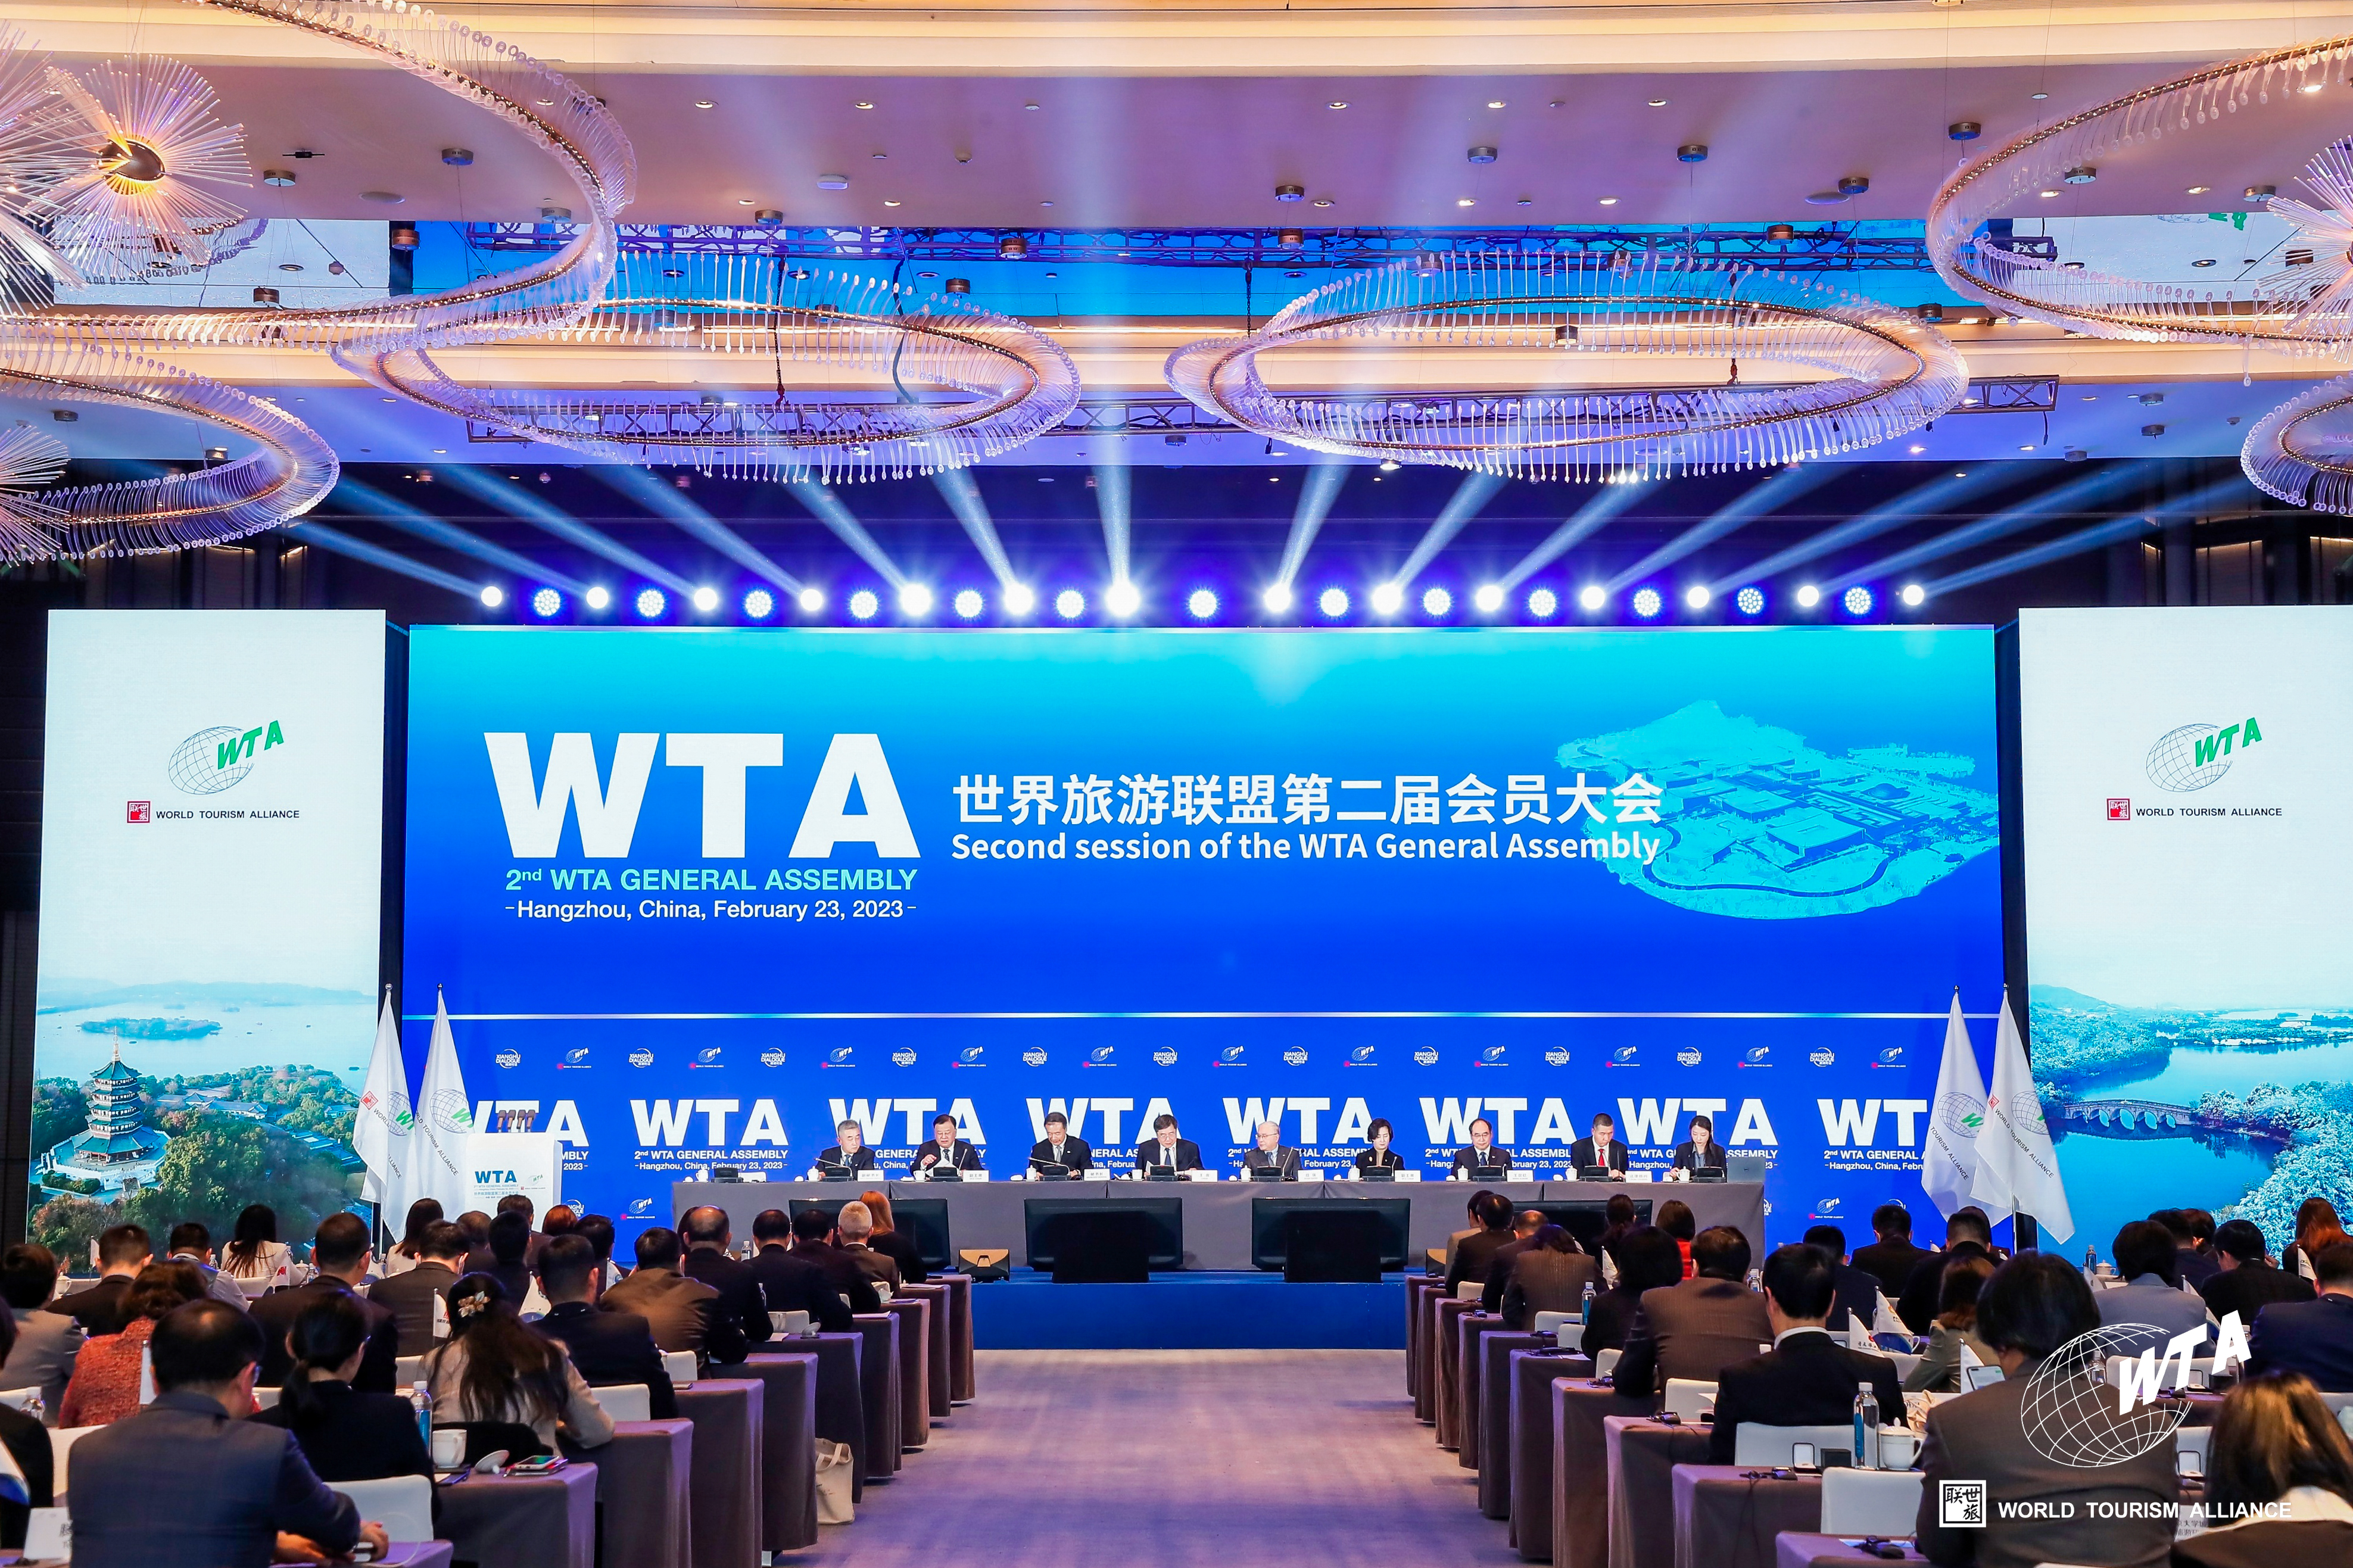 The 2nd WTA Session of the General Assembly and the First Session of the Second Council